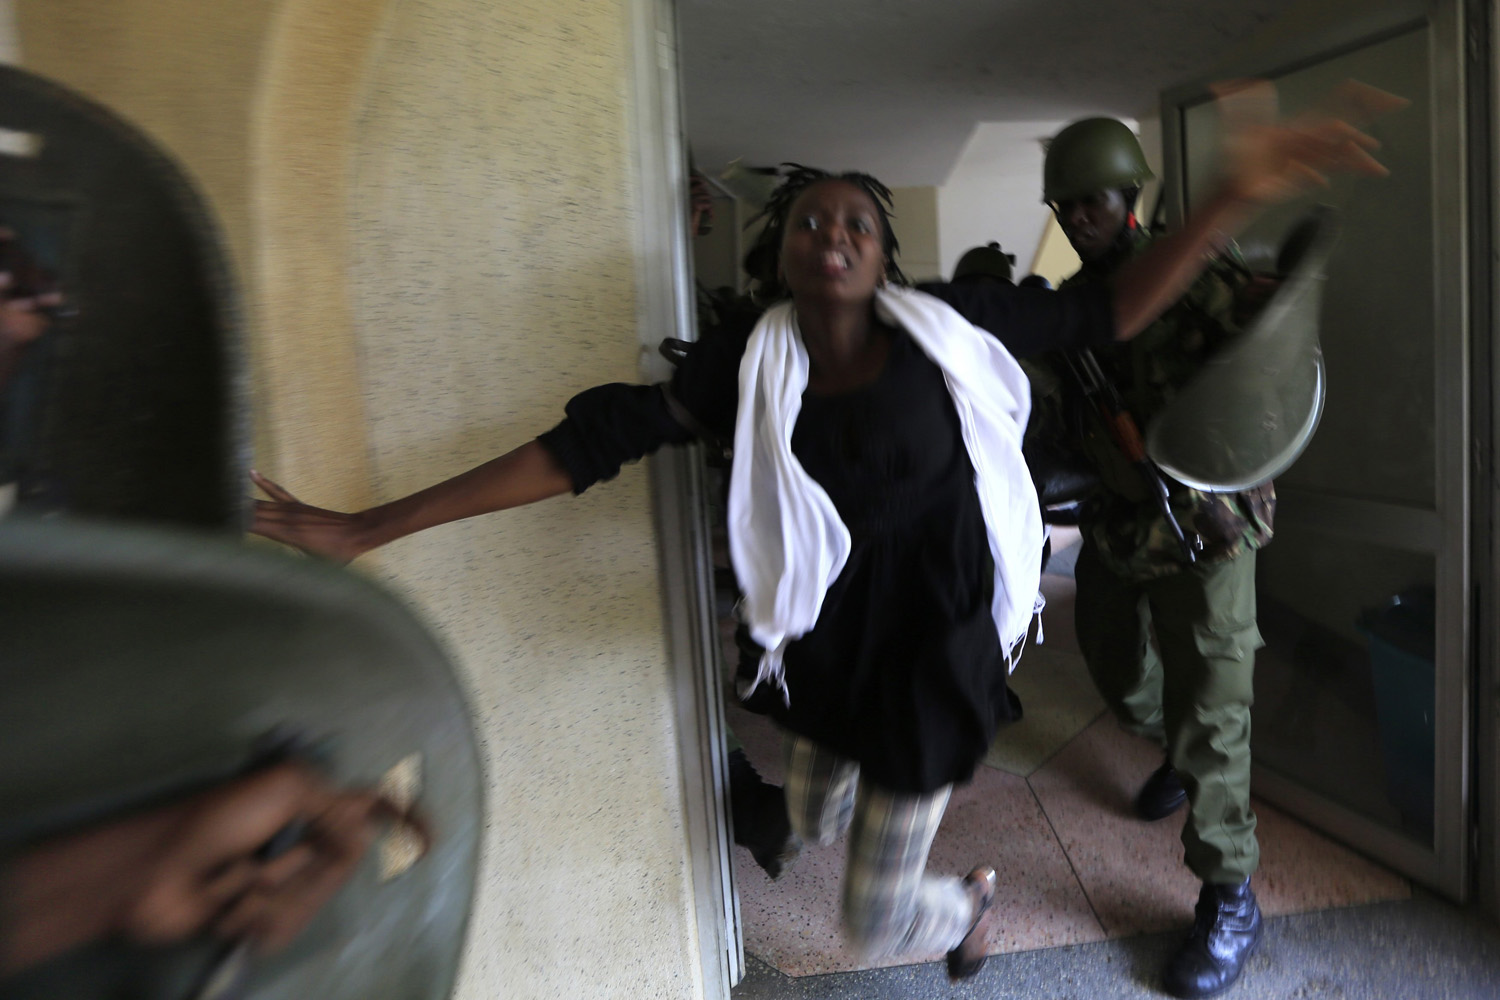 May 20, 2014. A riot policeman uses a baton to hit a rioting University of Nairobi student protesting against the planned hiking of fees and lowering of maximum loans awarded to students by the Higher Education Loans Board in Kenya's capital Nairobi.